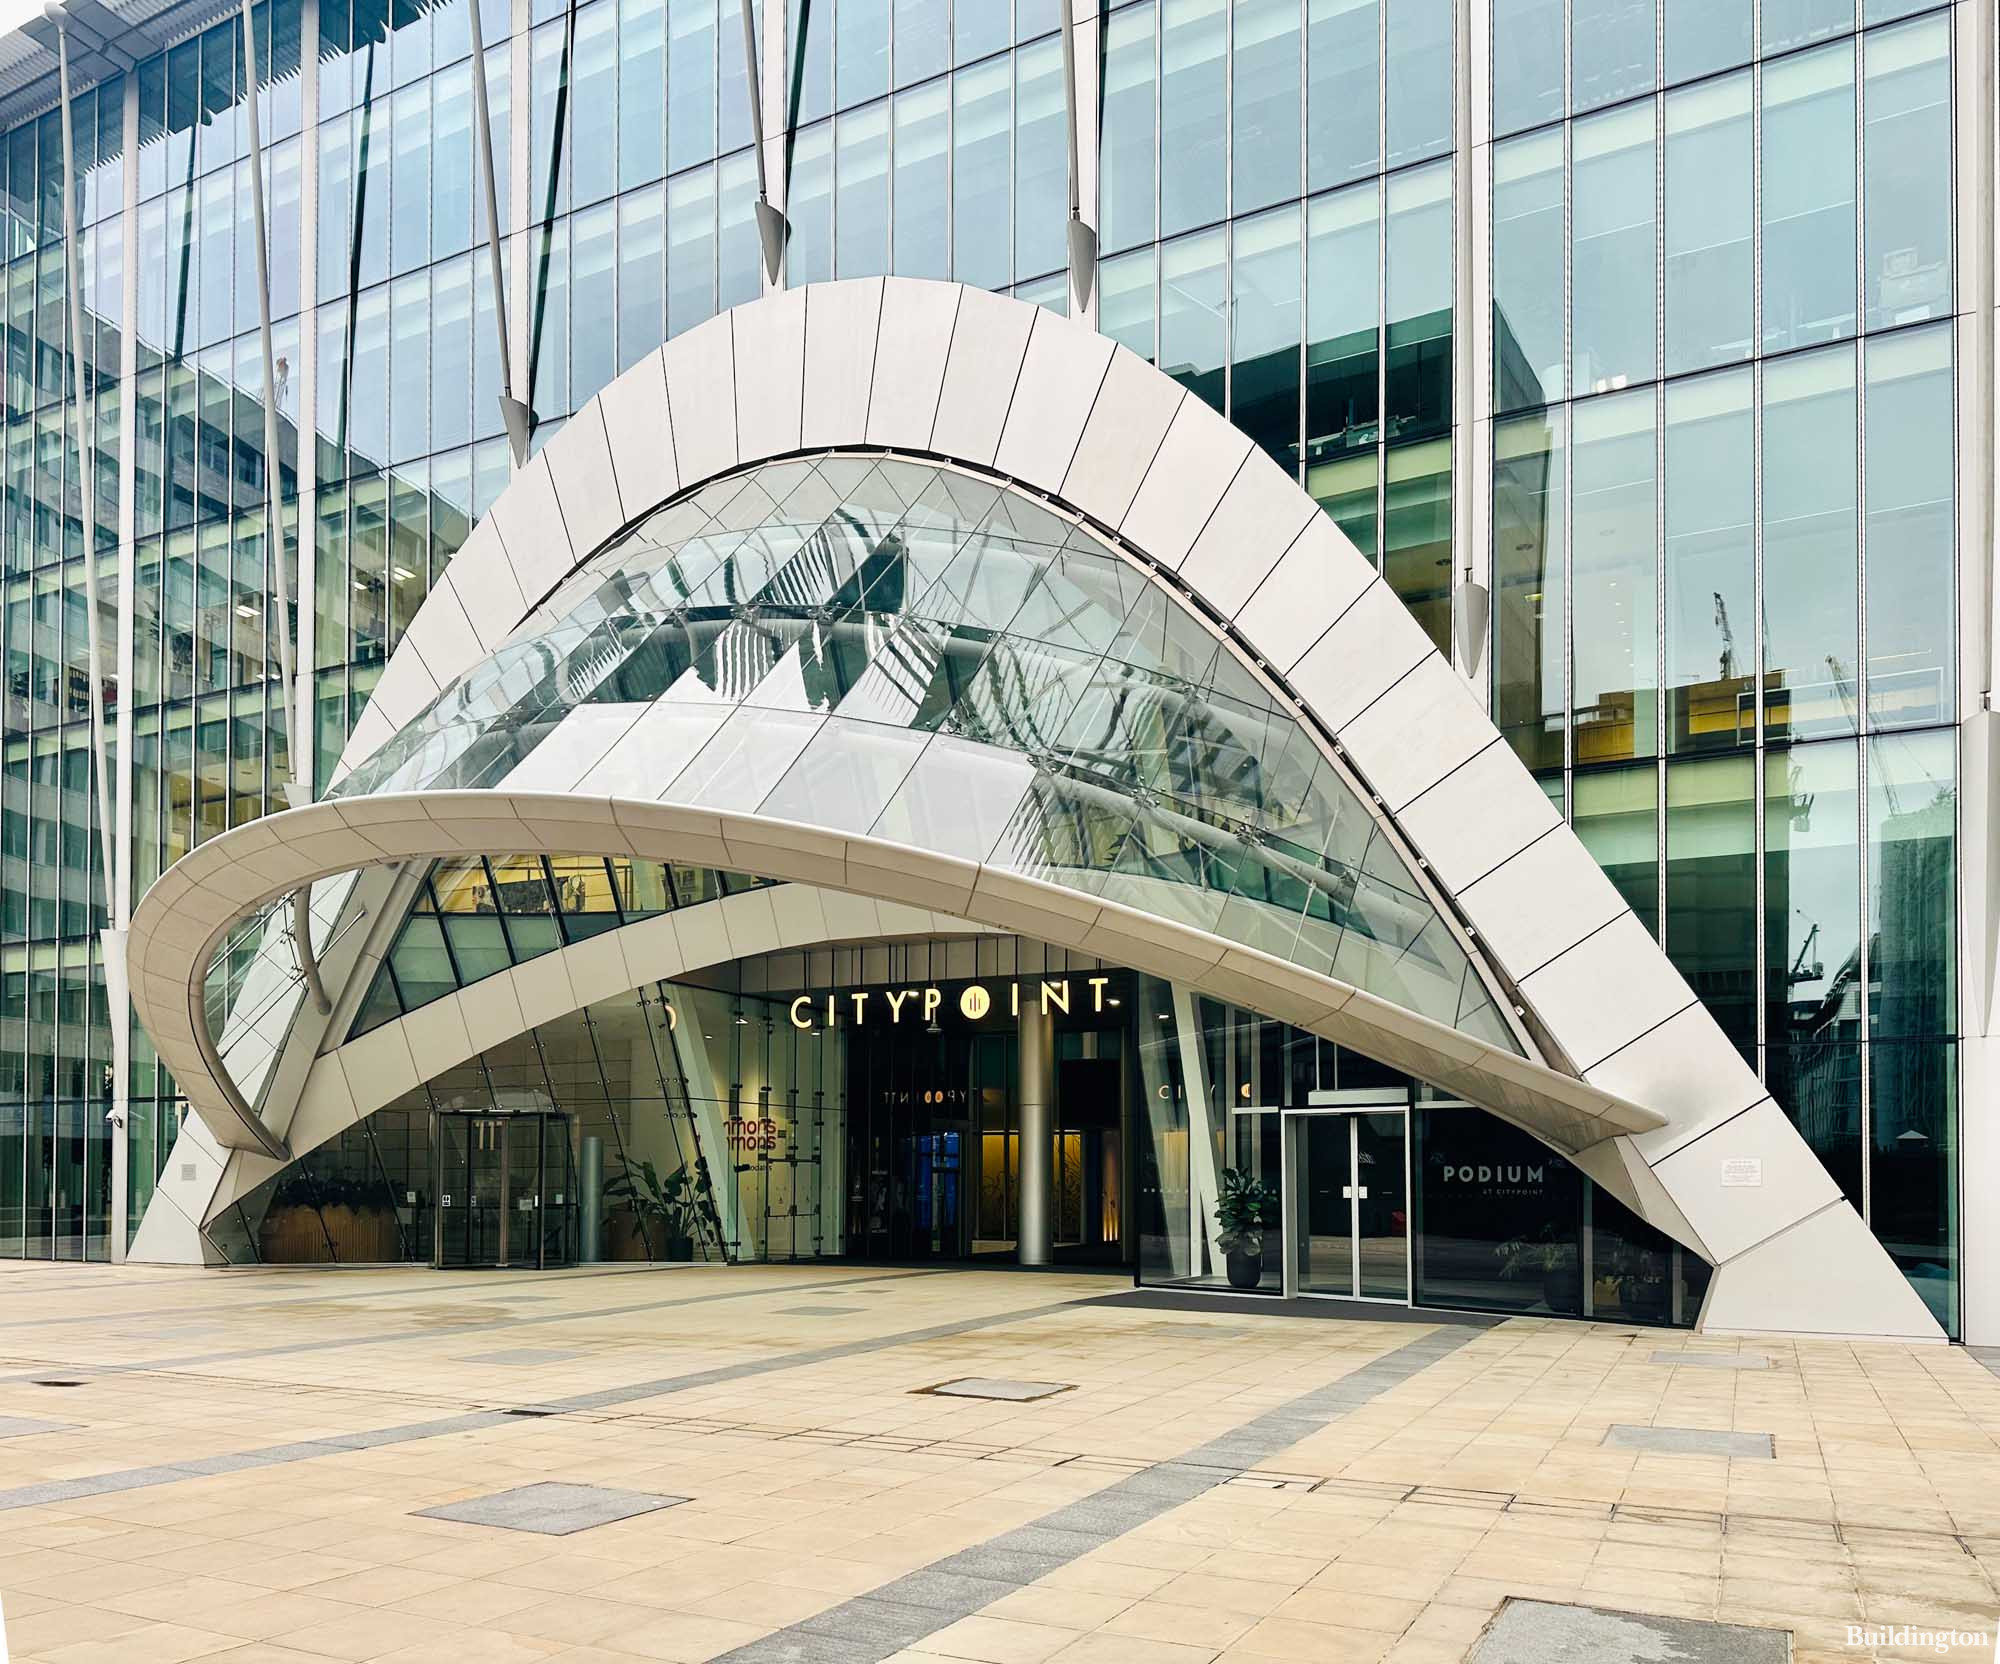 The grand CityPoint entrance off Ropemaker Street in the City of London EC2.